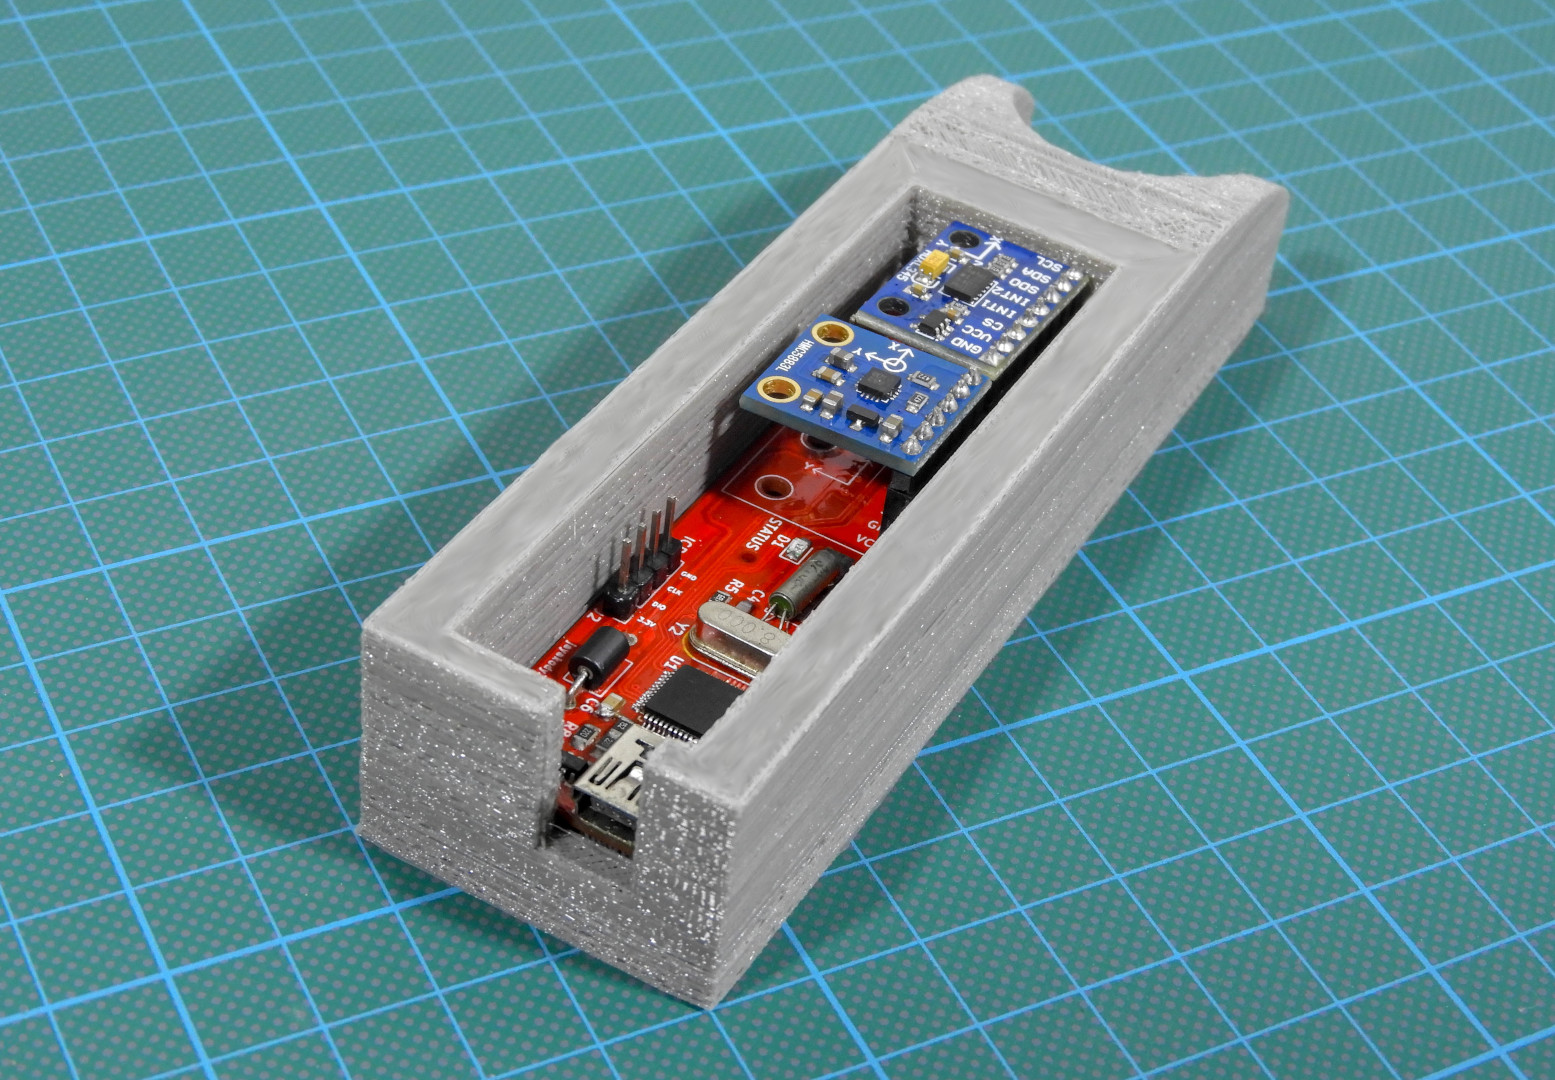 3D printed enclosure for the StarPointer PCB.